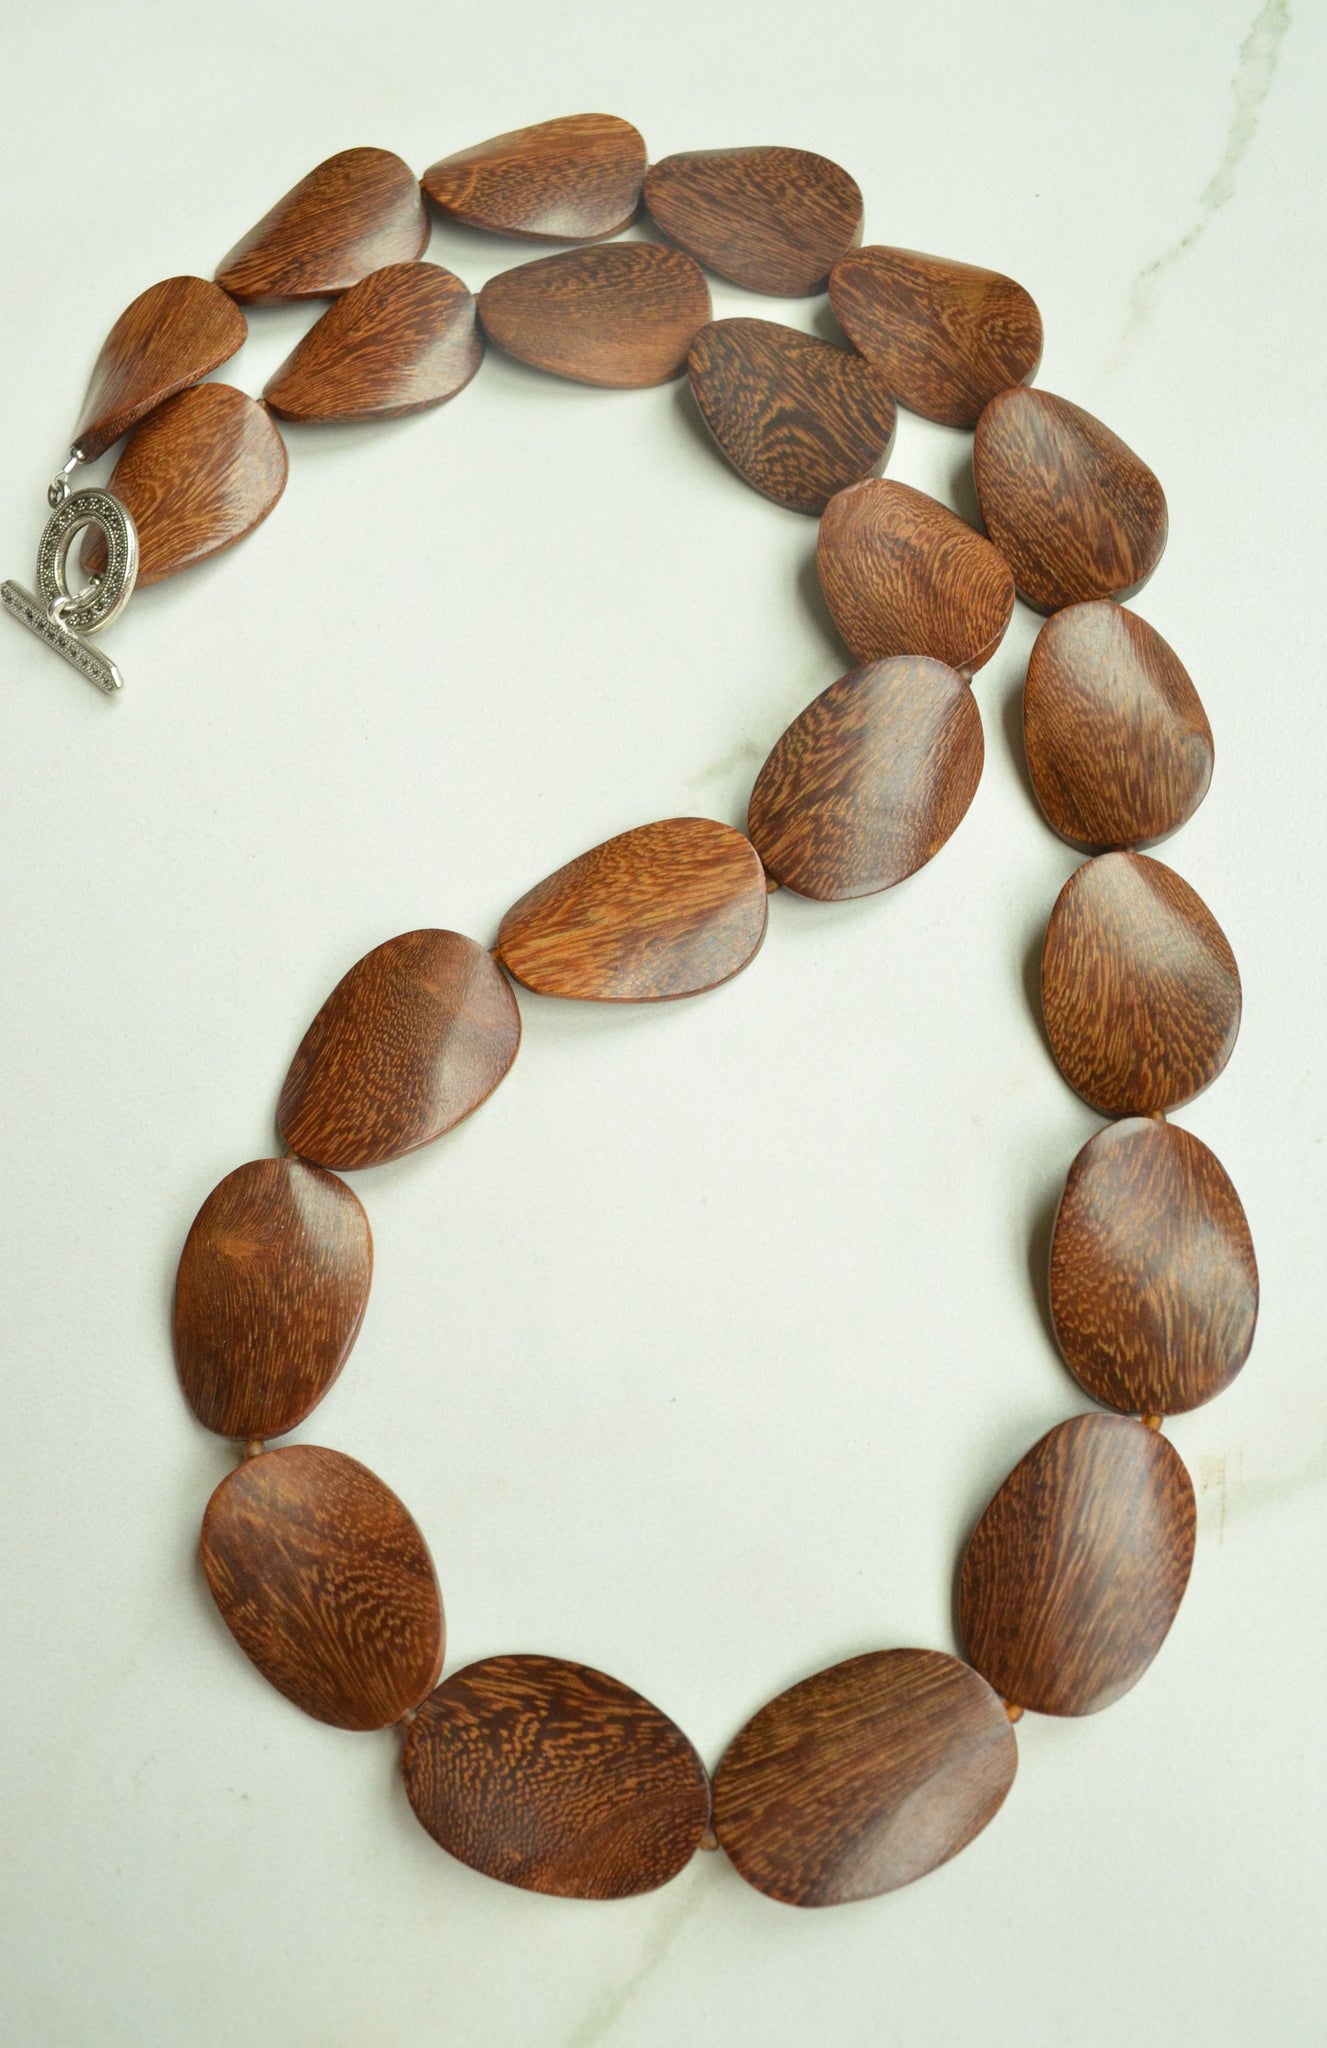 Sese Wood Necklace with Beads and Discs from Ghana - Promise of Beauty |  NOVICA